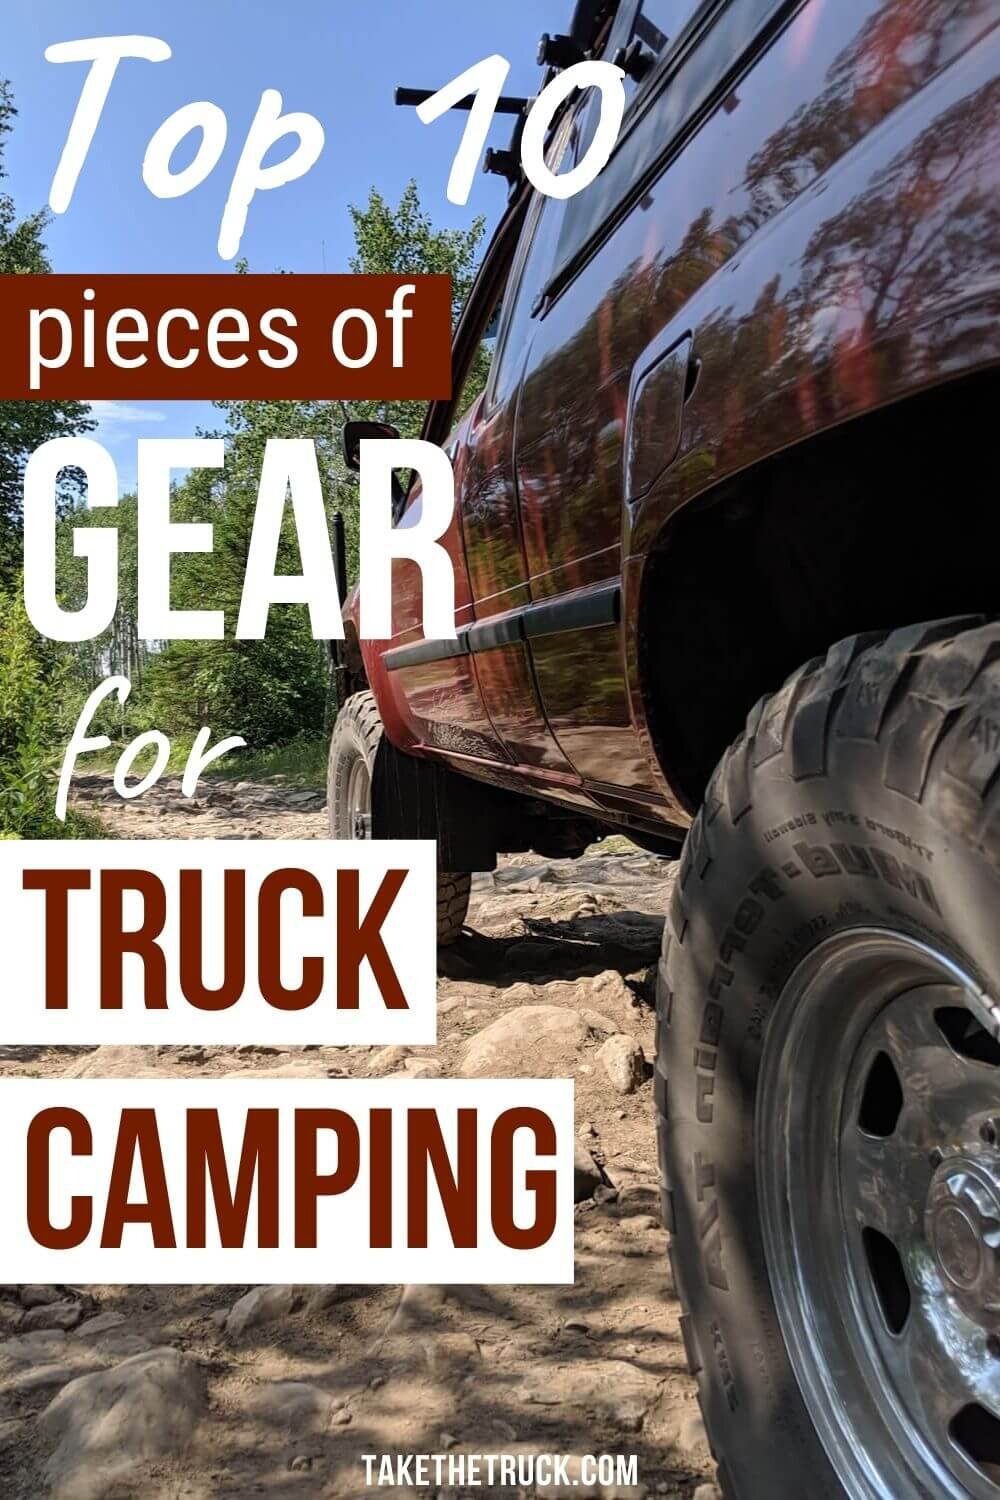 Ten great outdoor Christmas gift ideas for camping friends and outdoor lovers-especially for truck bed camping!